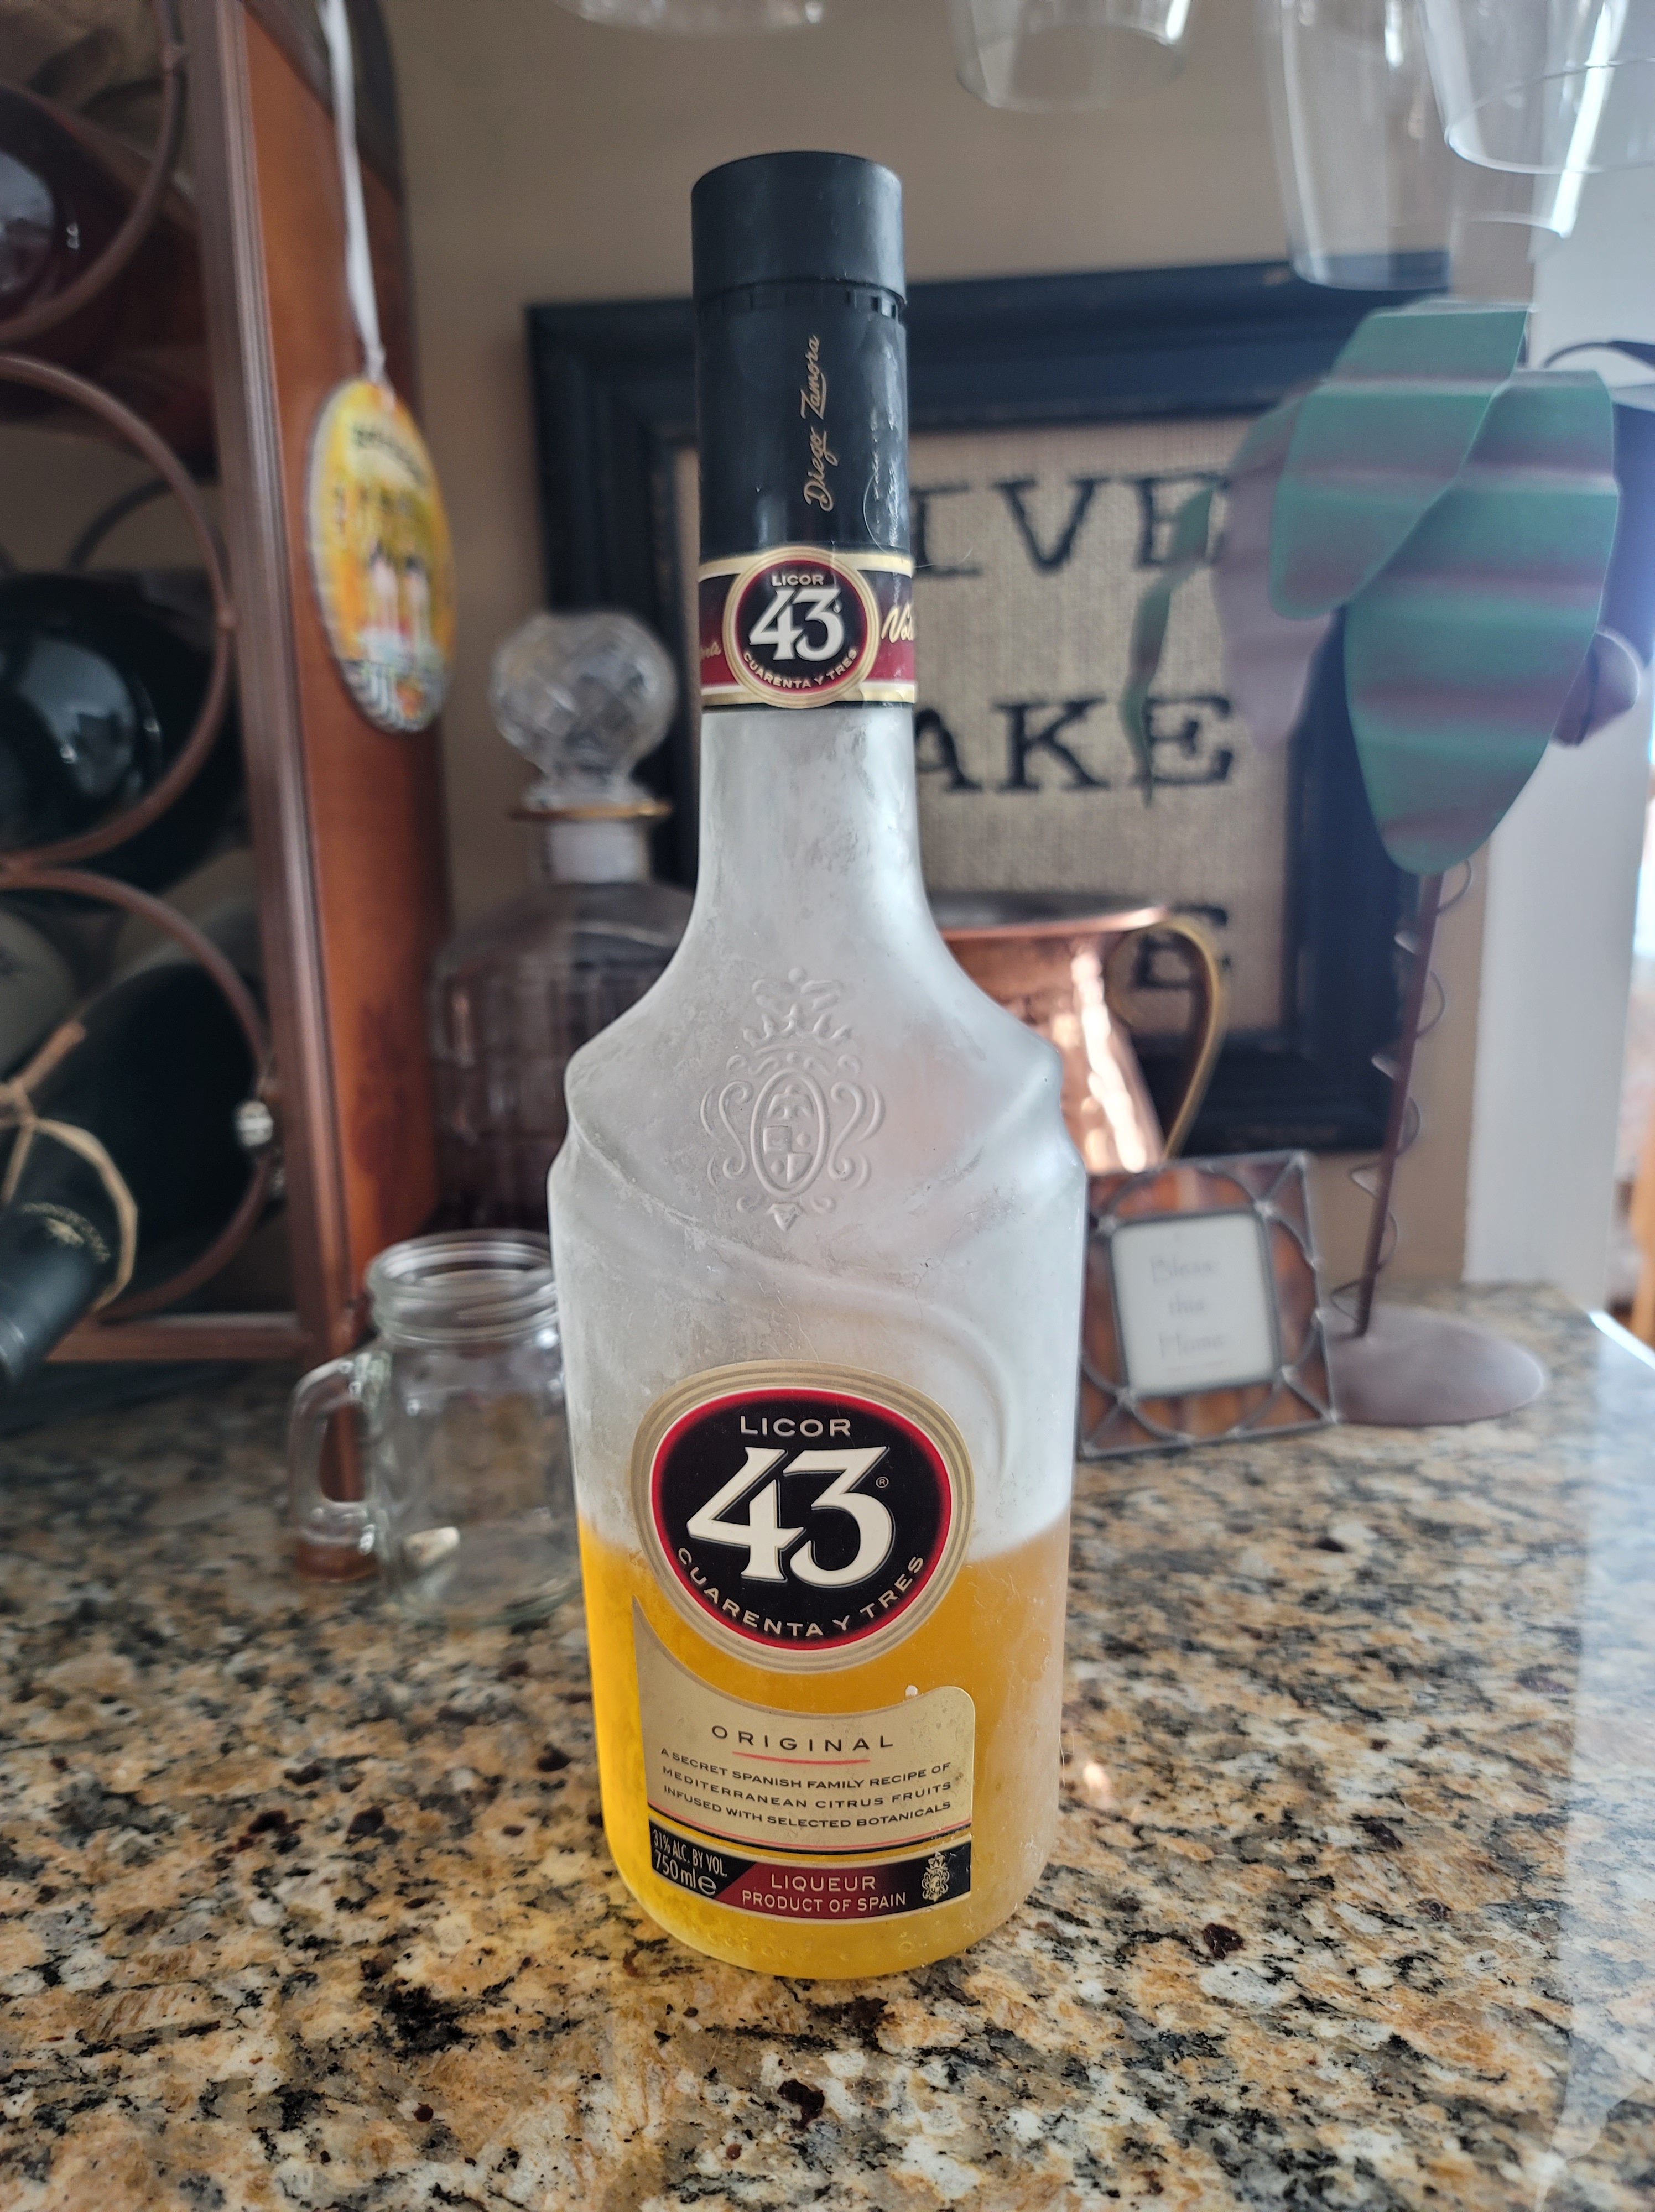 Bottle of Licor 43 fresh out of the freezer